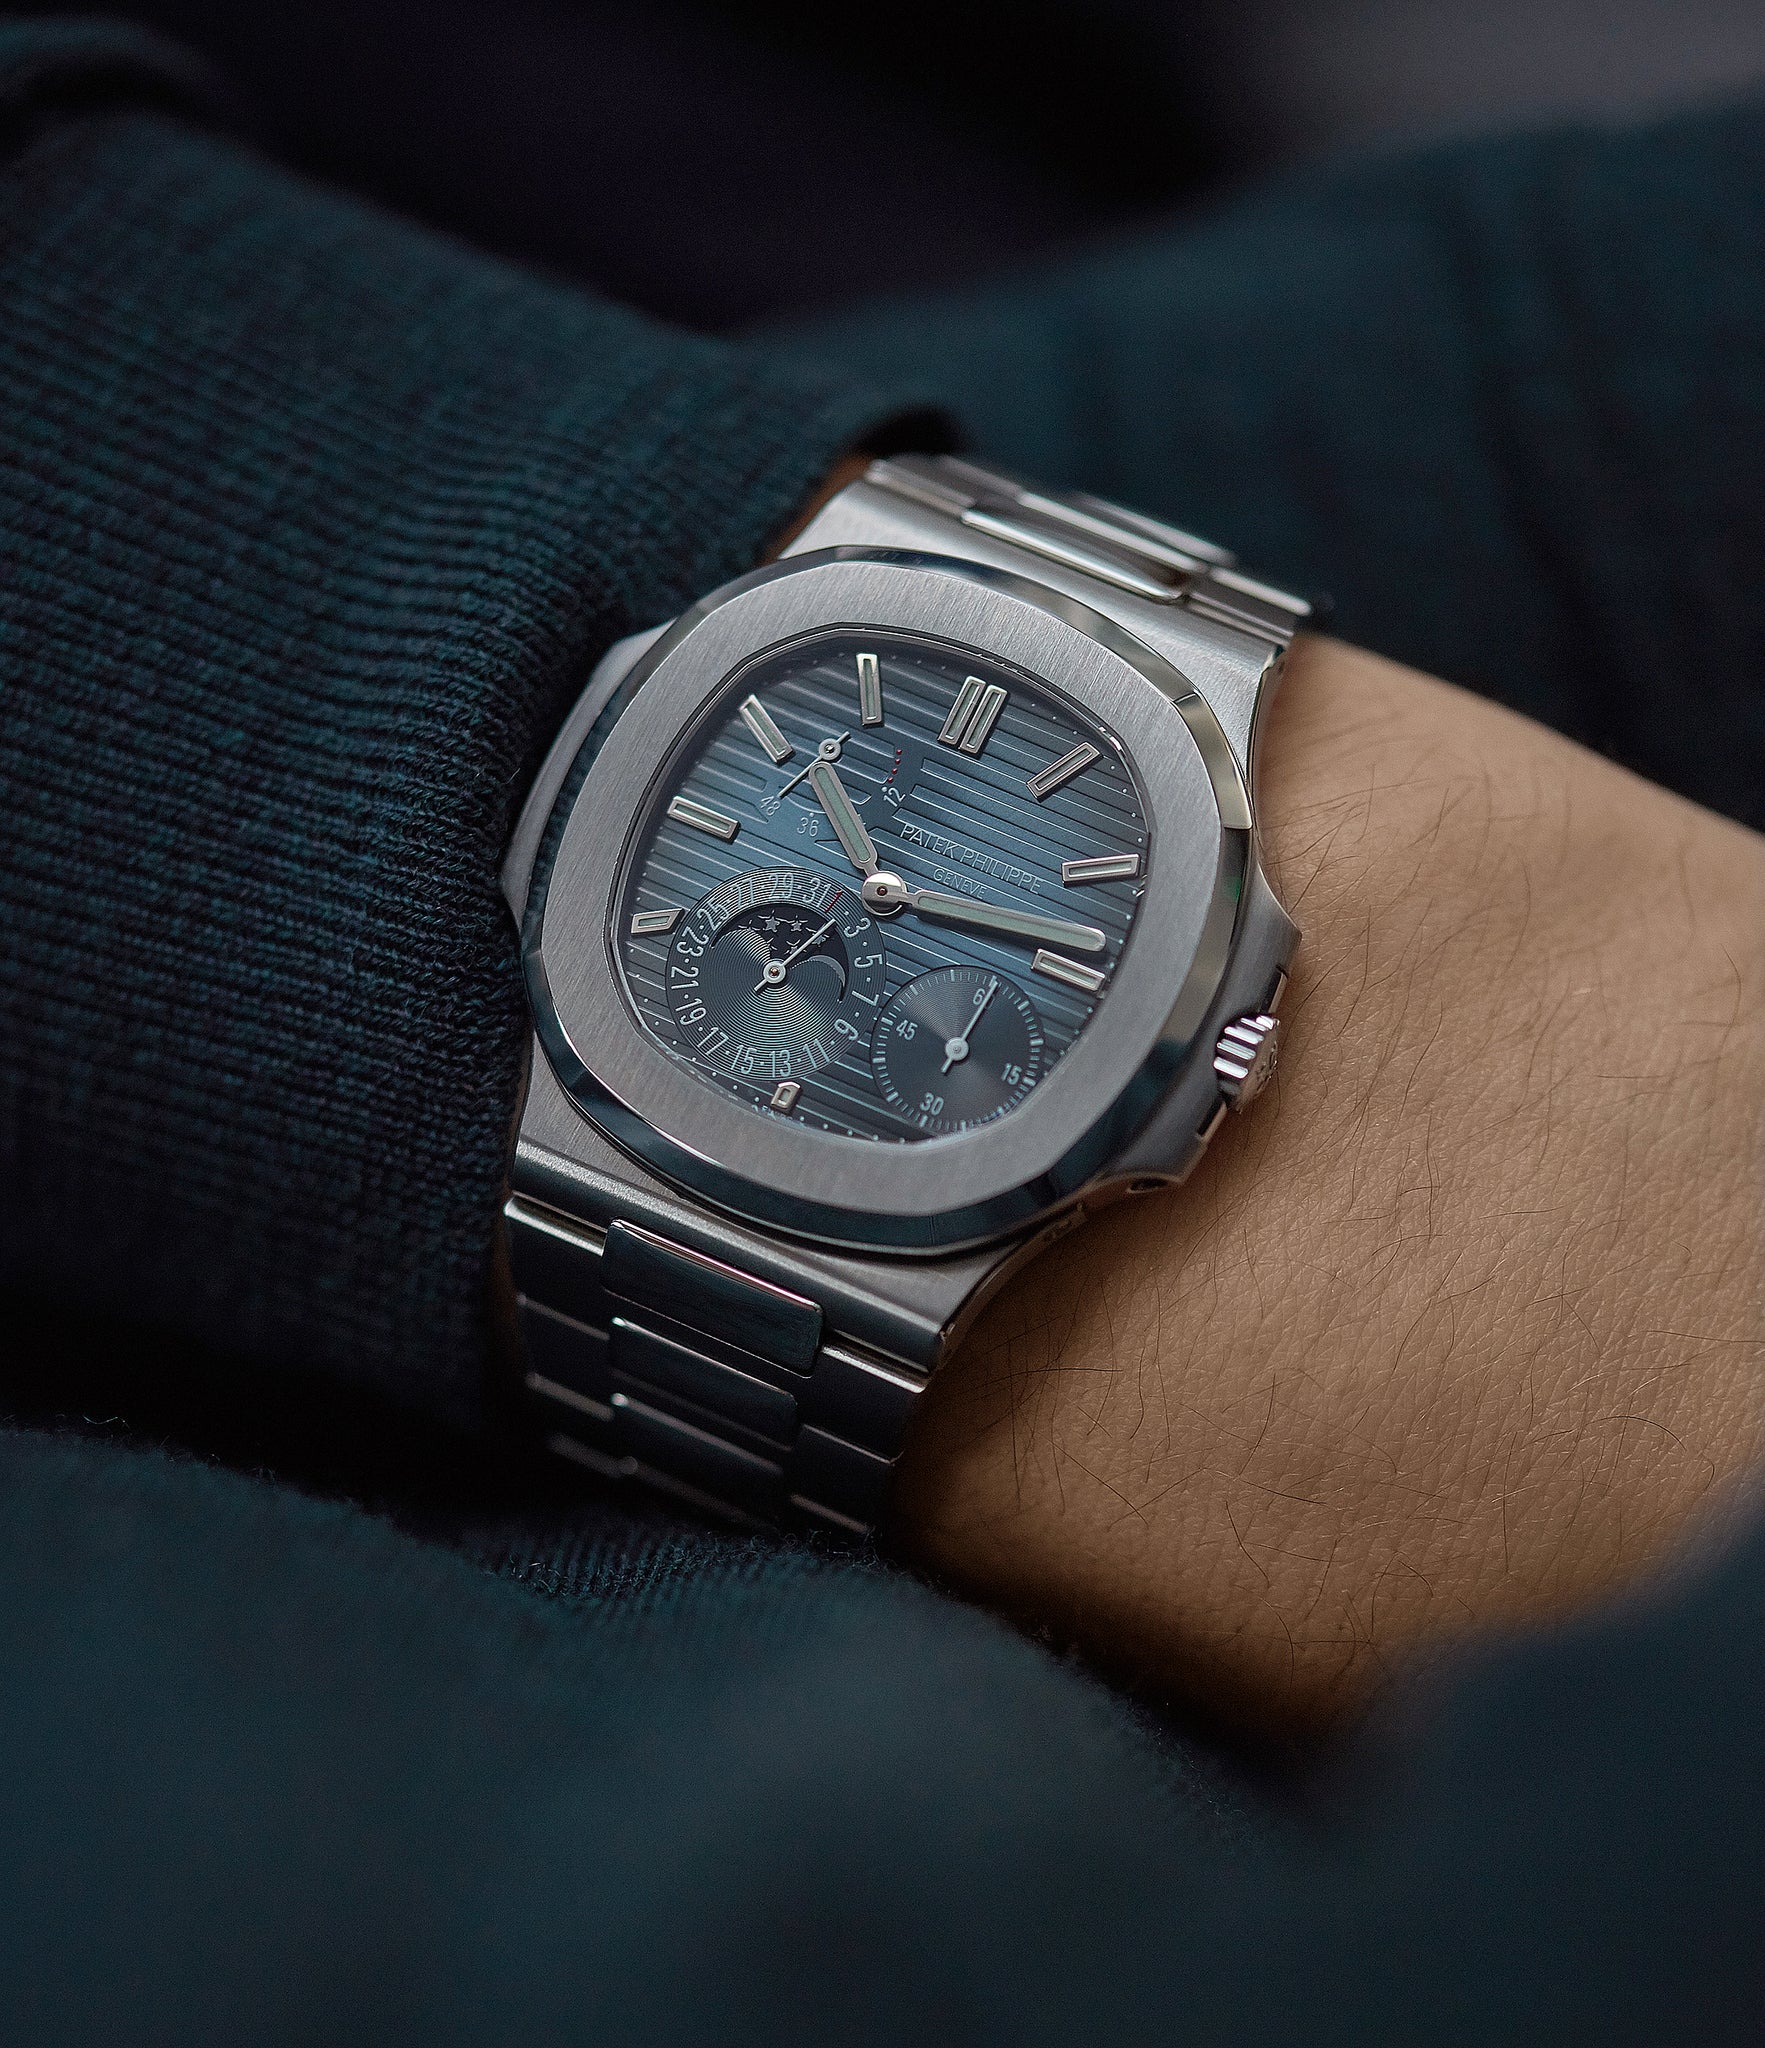 Moon-phase Patek Philippe Nautilus 5712/1A-001 steel pre-owned watch for sale online at A Collected Man London UK specialist of rare watches